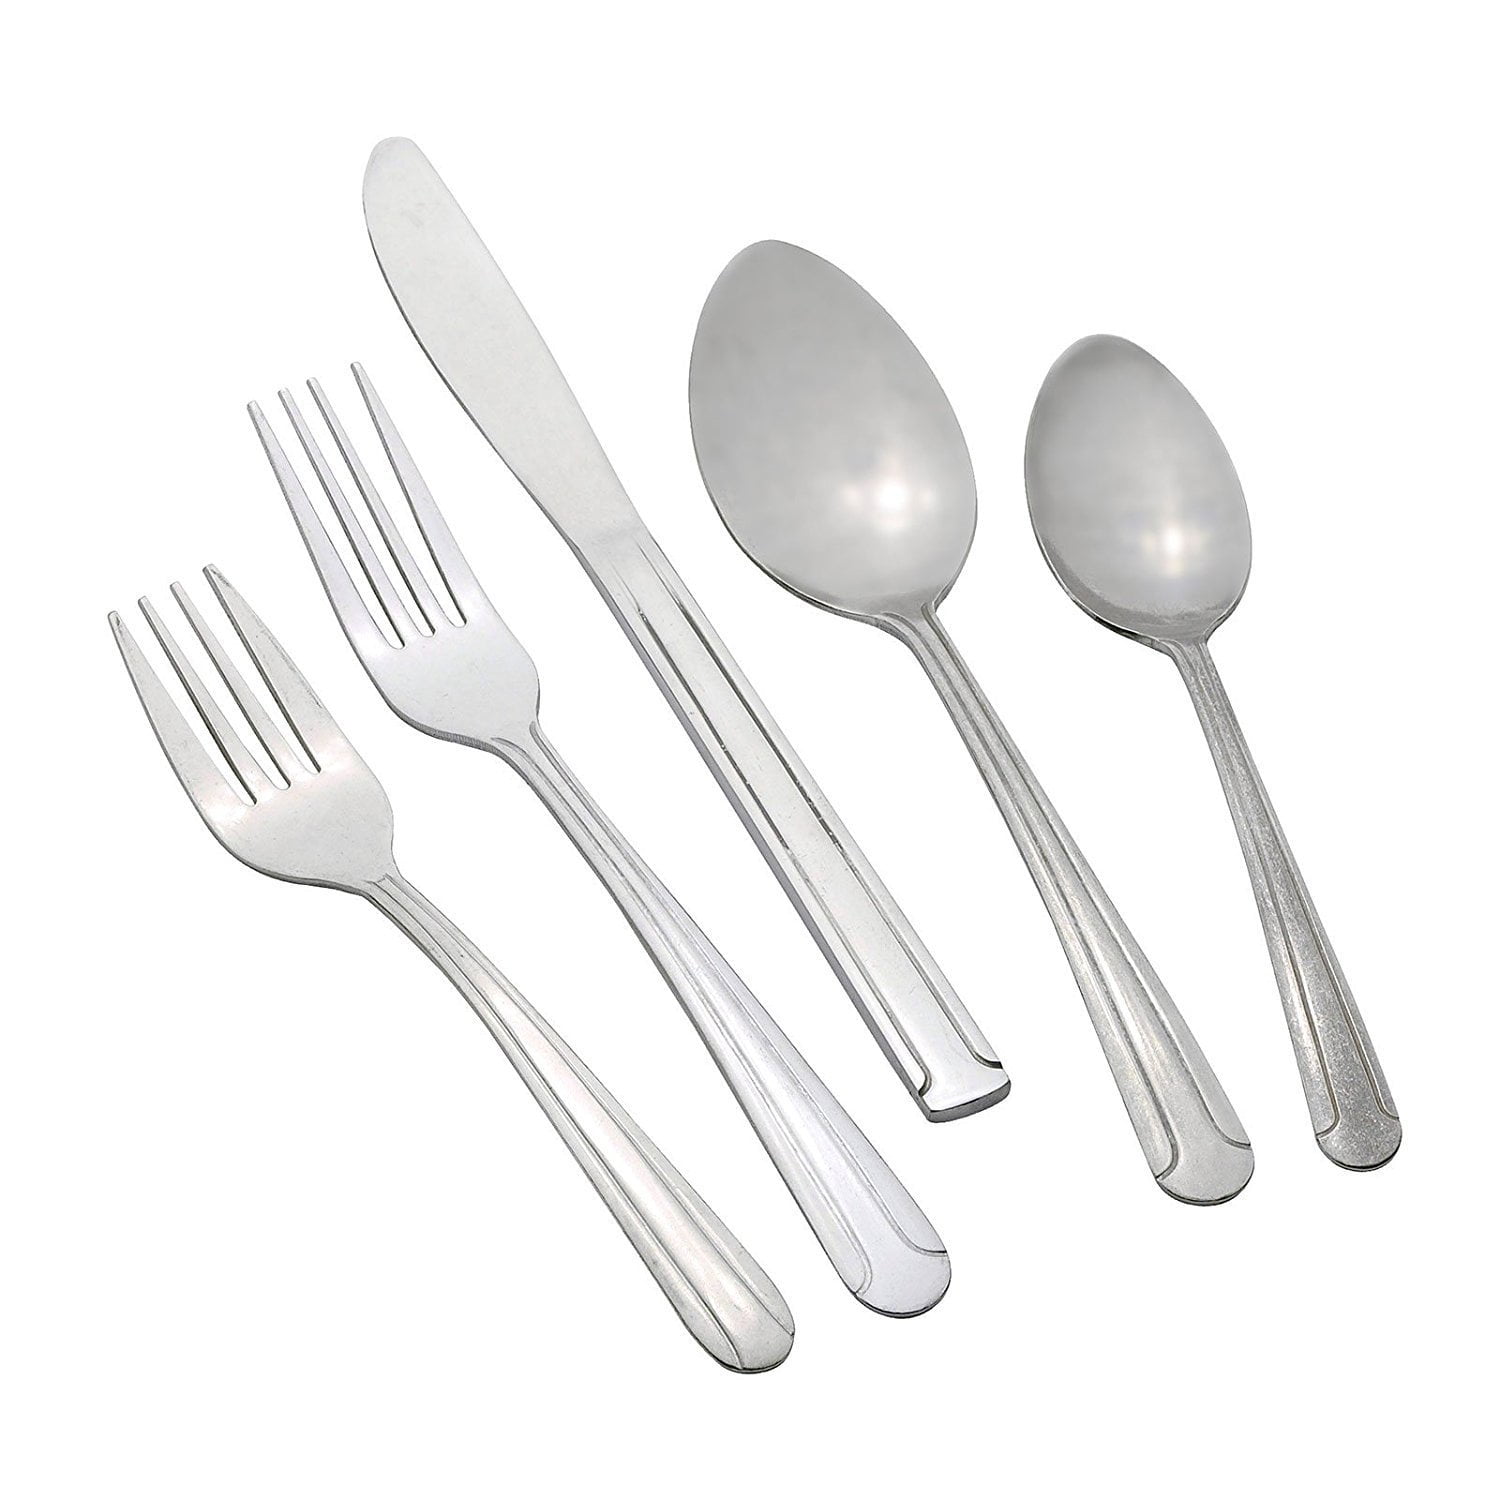 450 PIECES WINDSOR FLATWARE 18/0 STAINLESS FREE SHIPPING US ONLY 